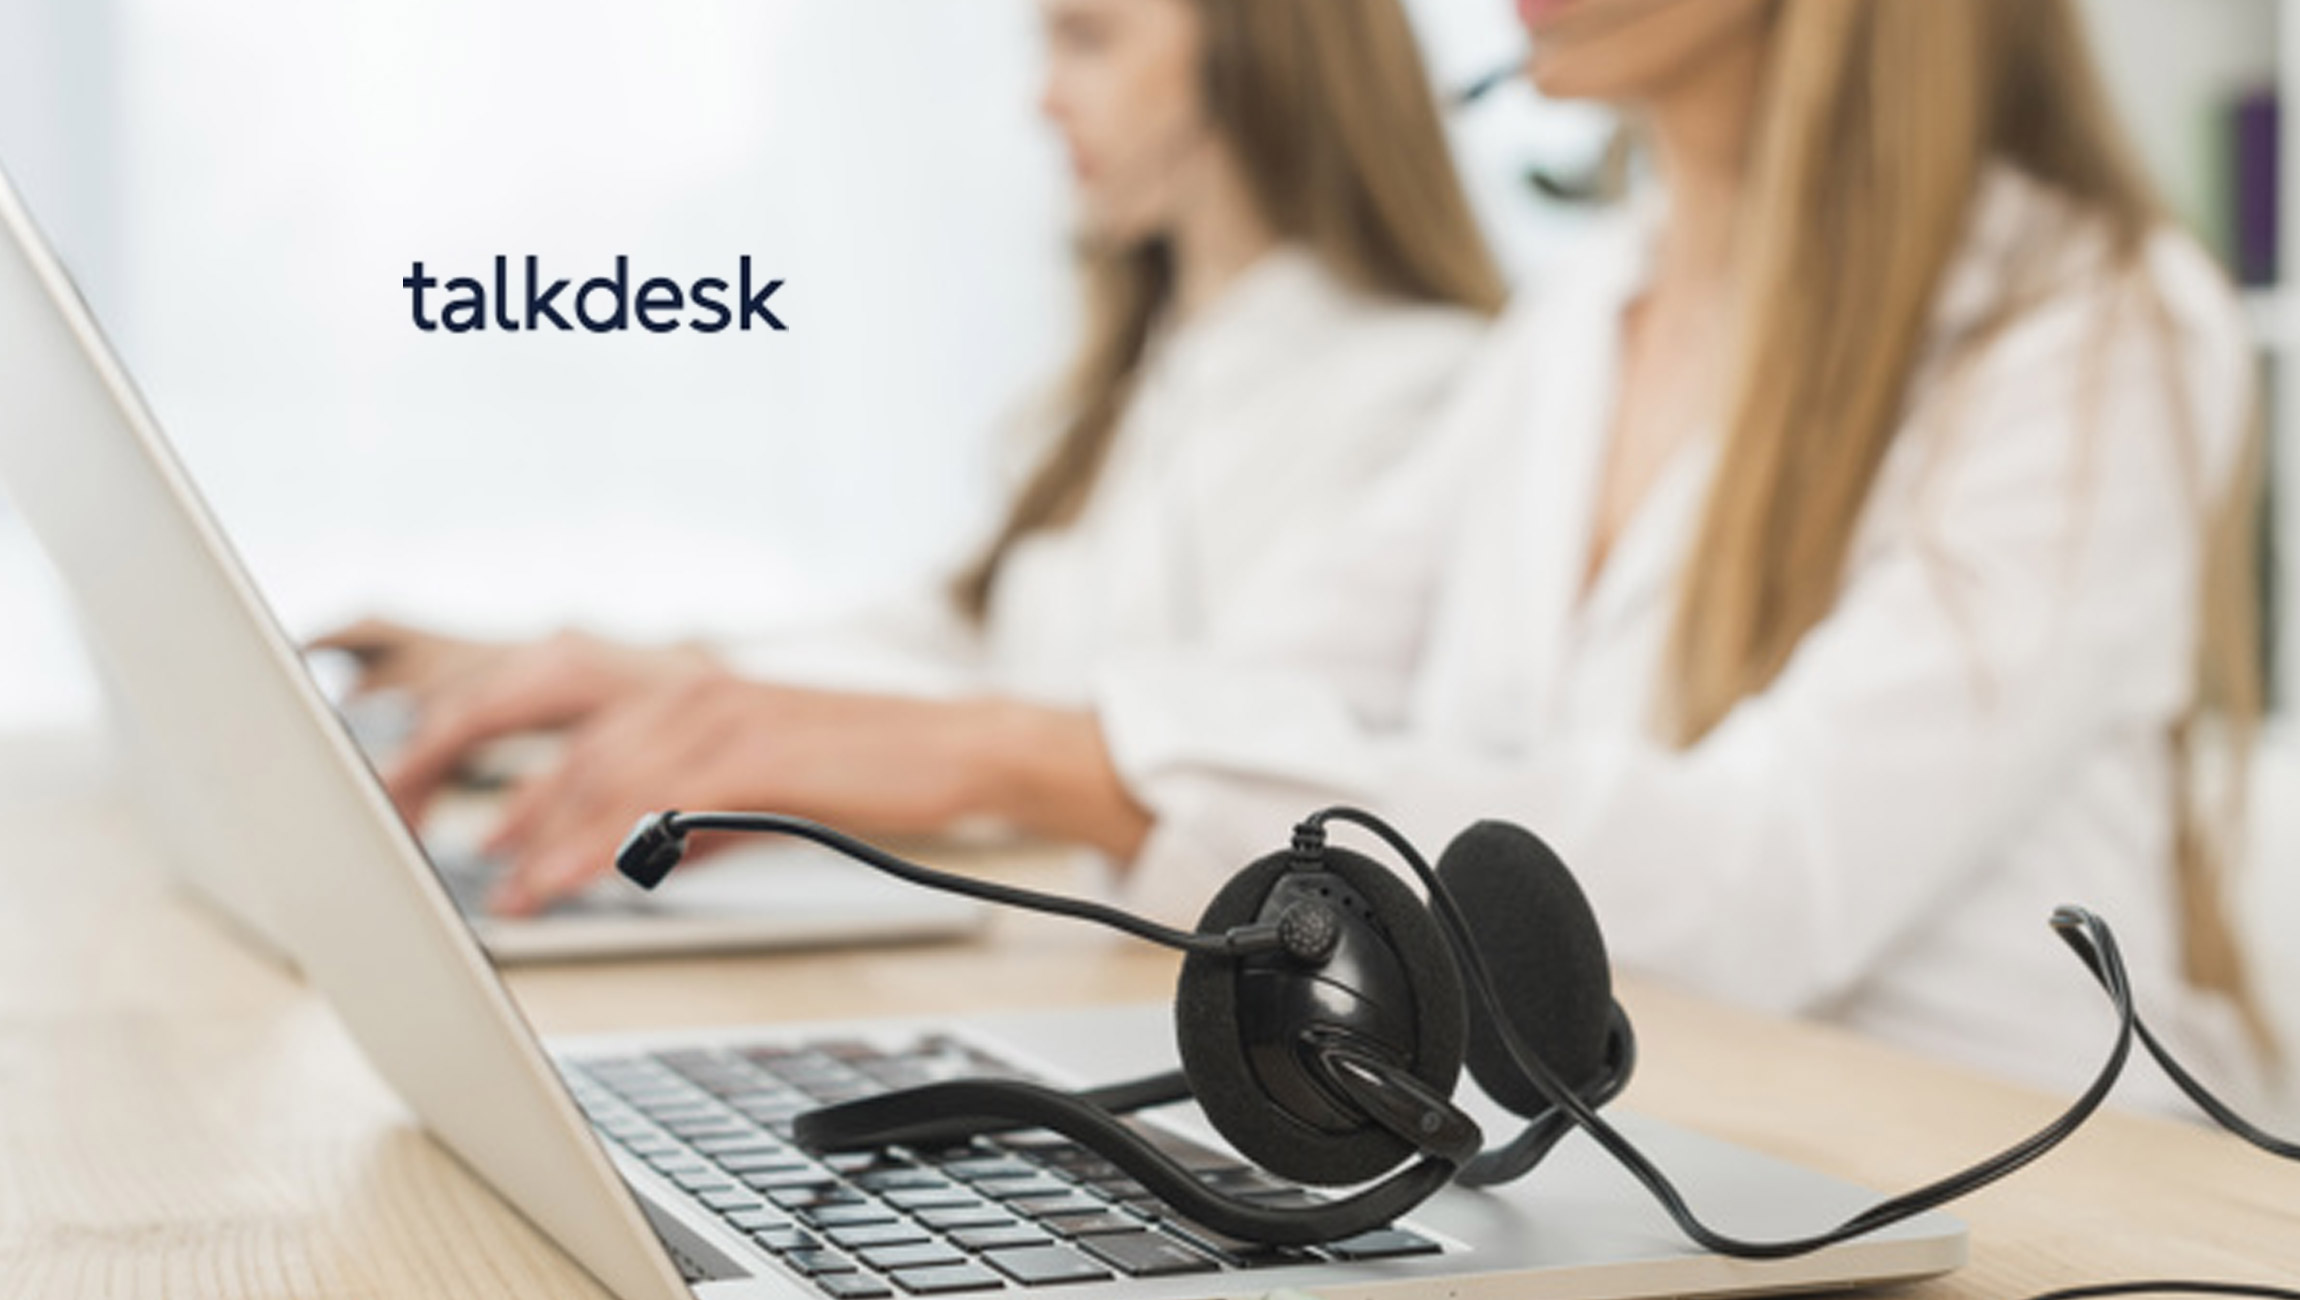 New Talkdesk Research Reveals the Trends to Watch in Retail CX